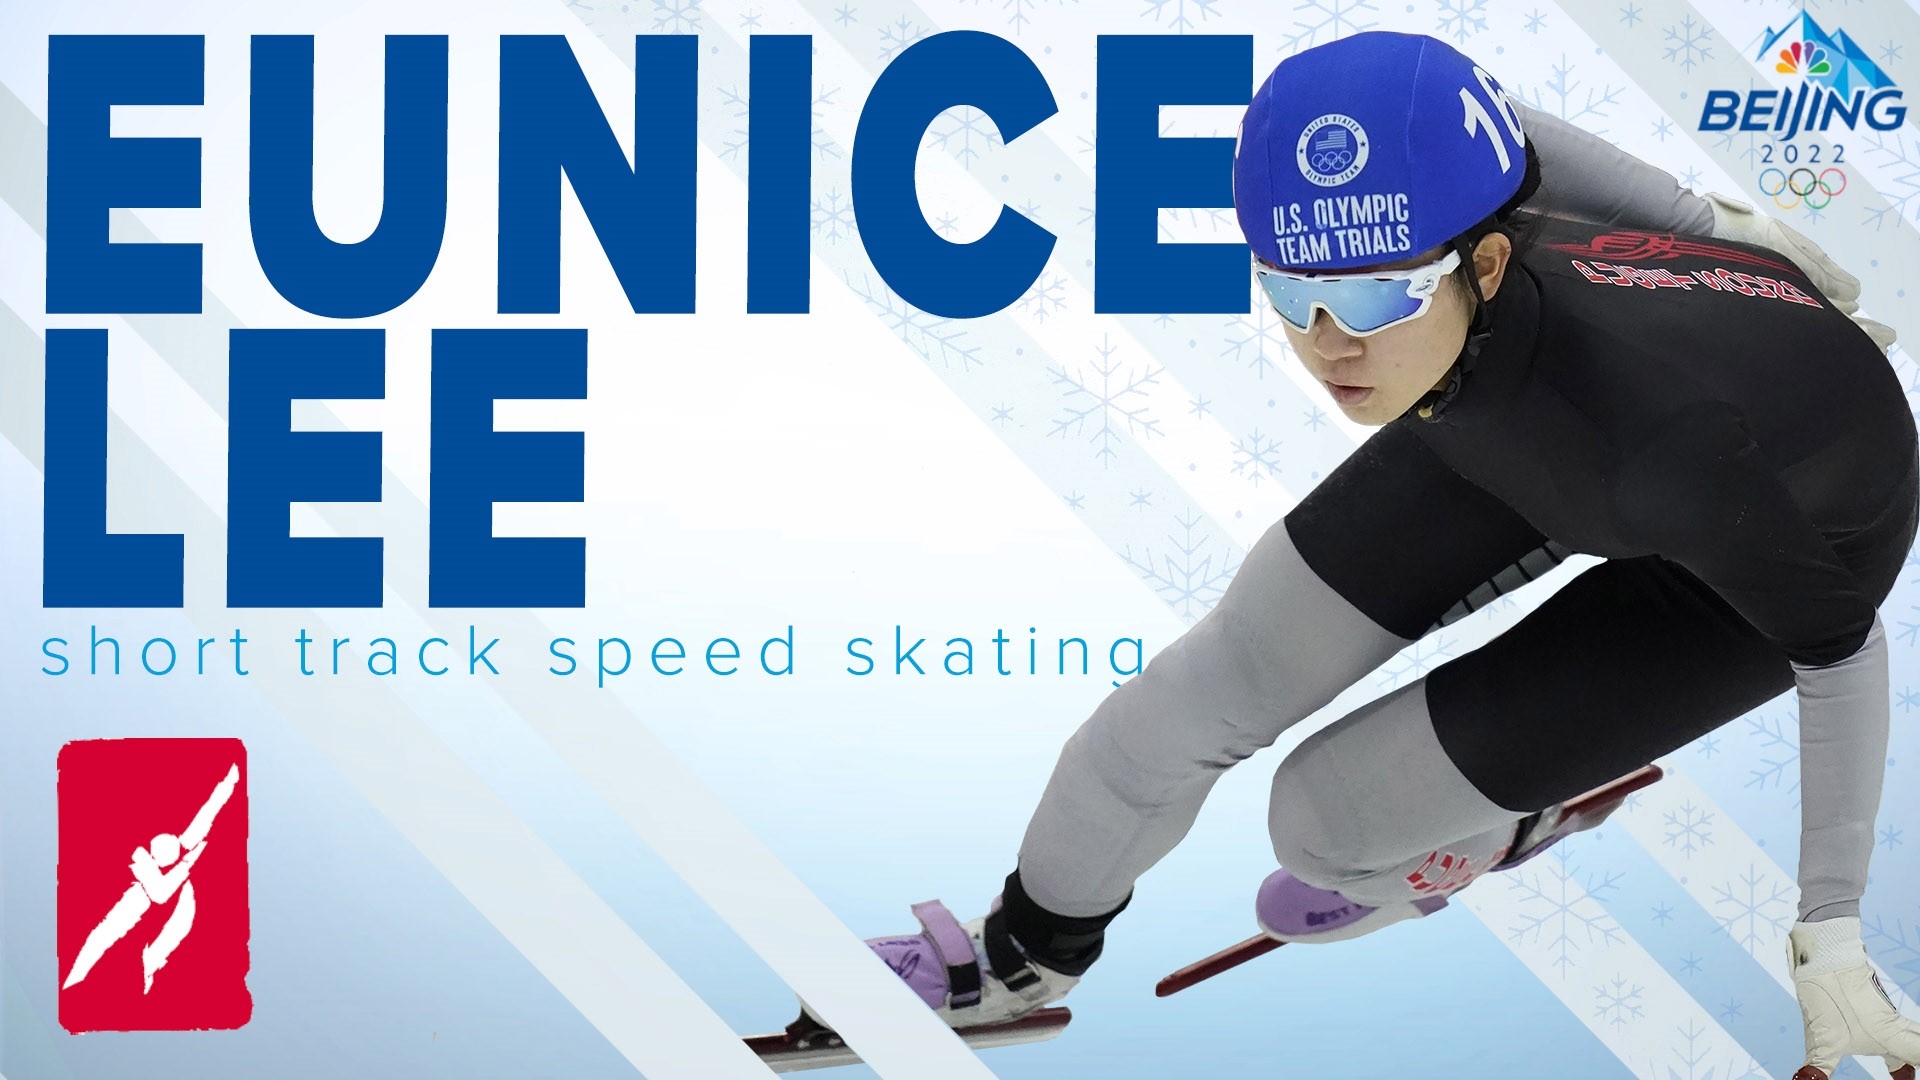 Eunice Lee moved to Bellevue from South Korea when she was 6 years old. Now she’s the youngest speedskater on Team USA.